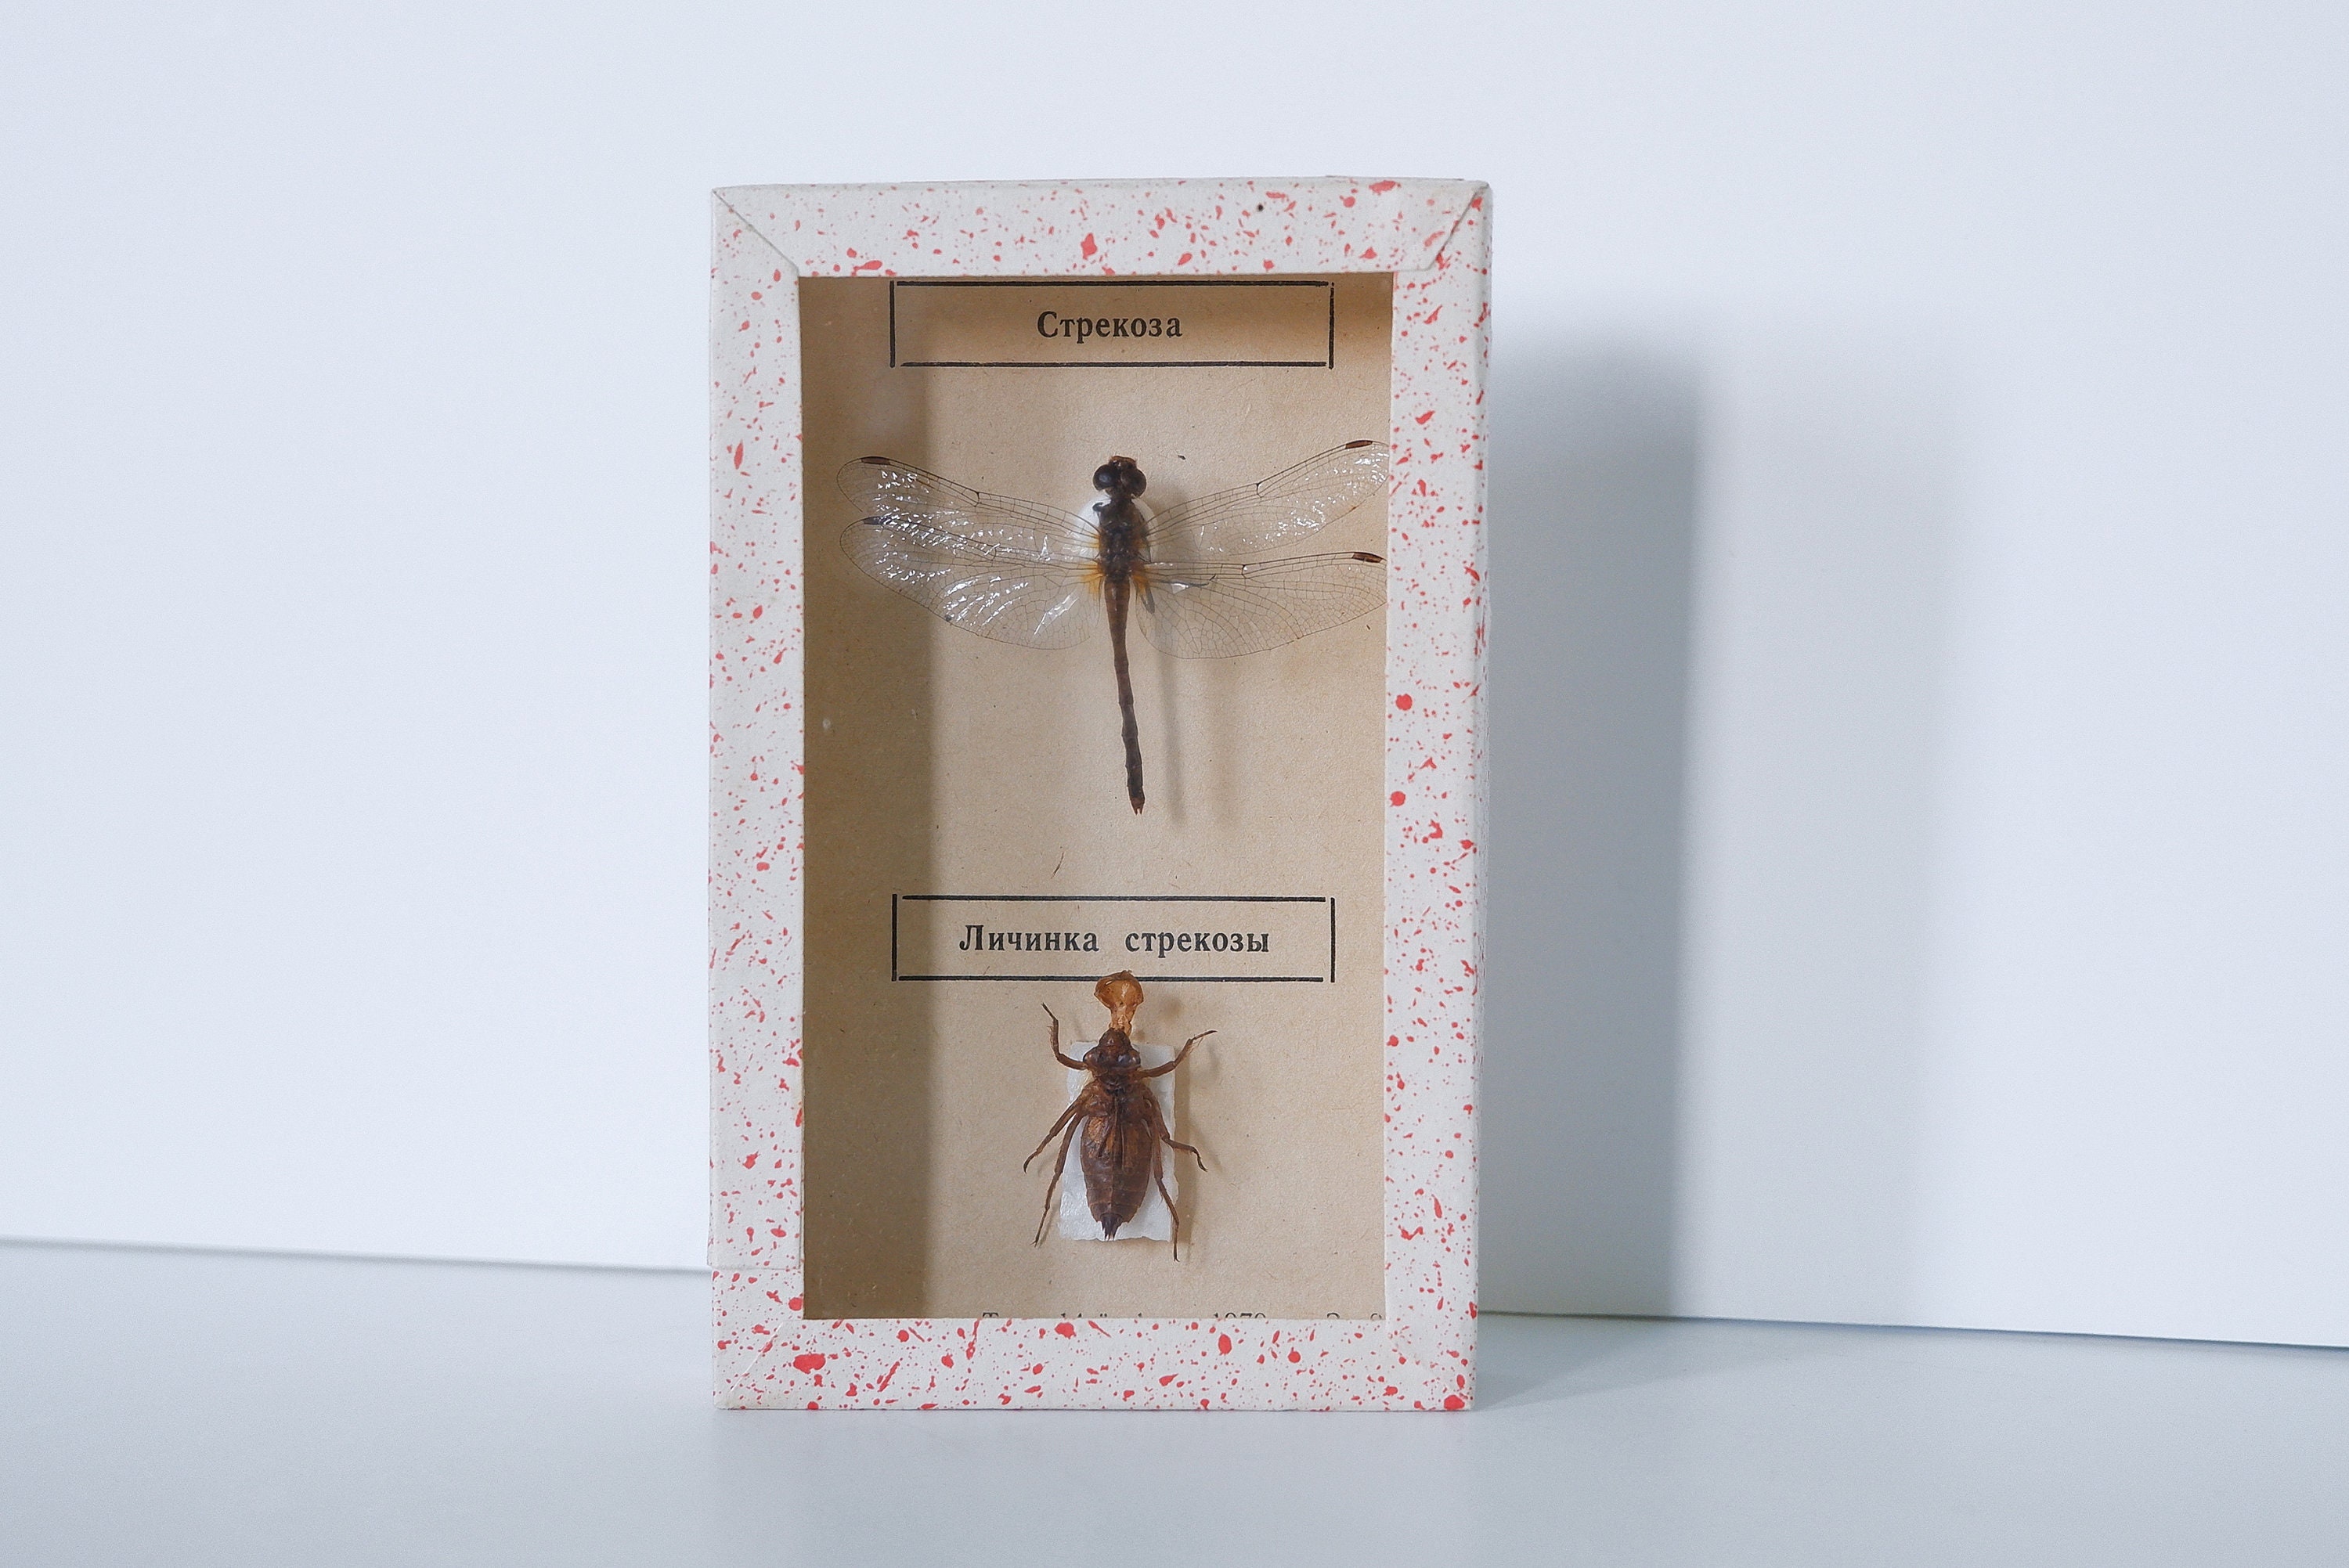 Plastic Collection Display Box  Insects Decor Transparent Box